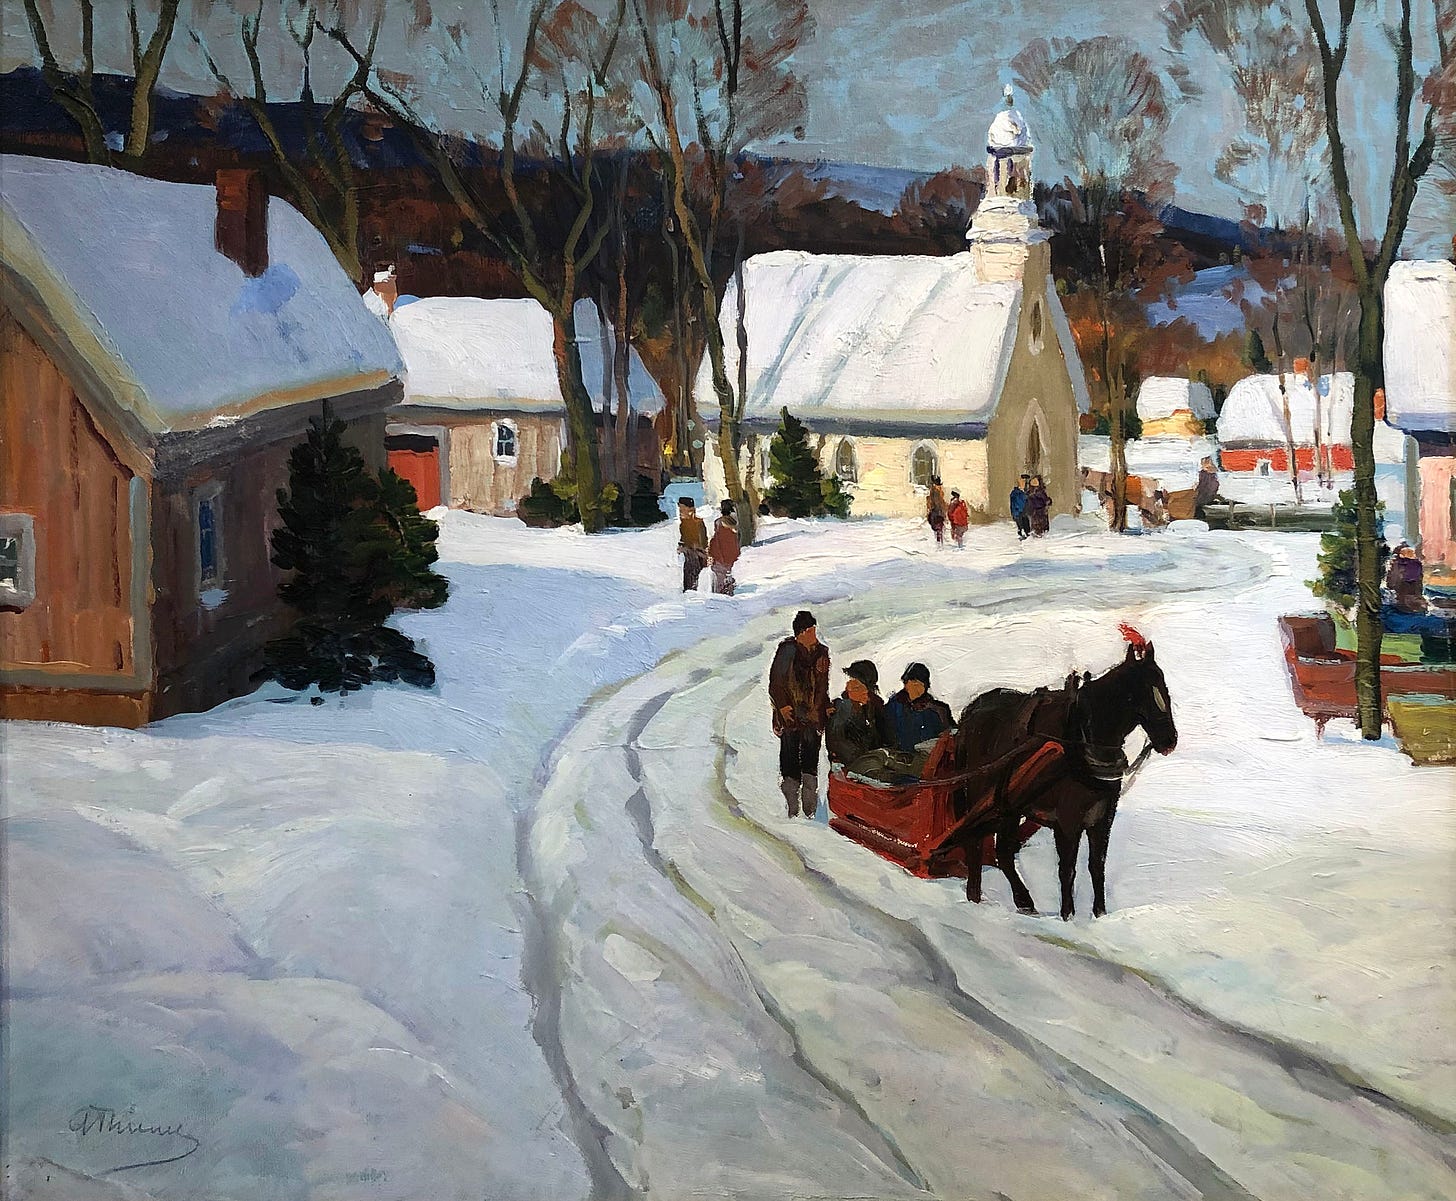 A horse drawn carriage on a snowy road

Description automatically generated with low confidence